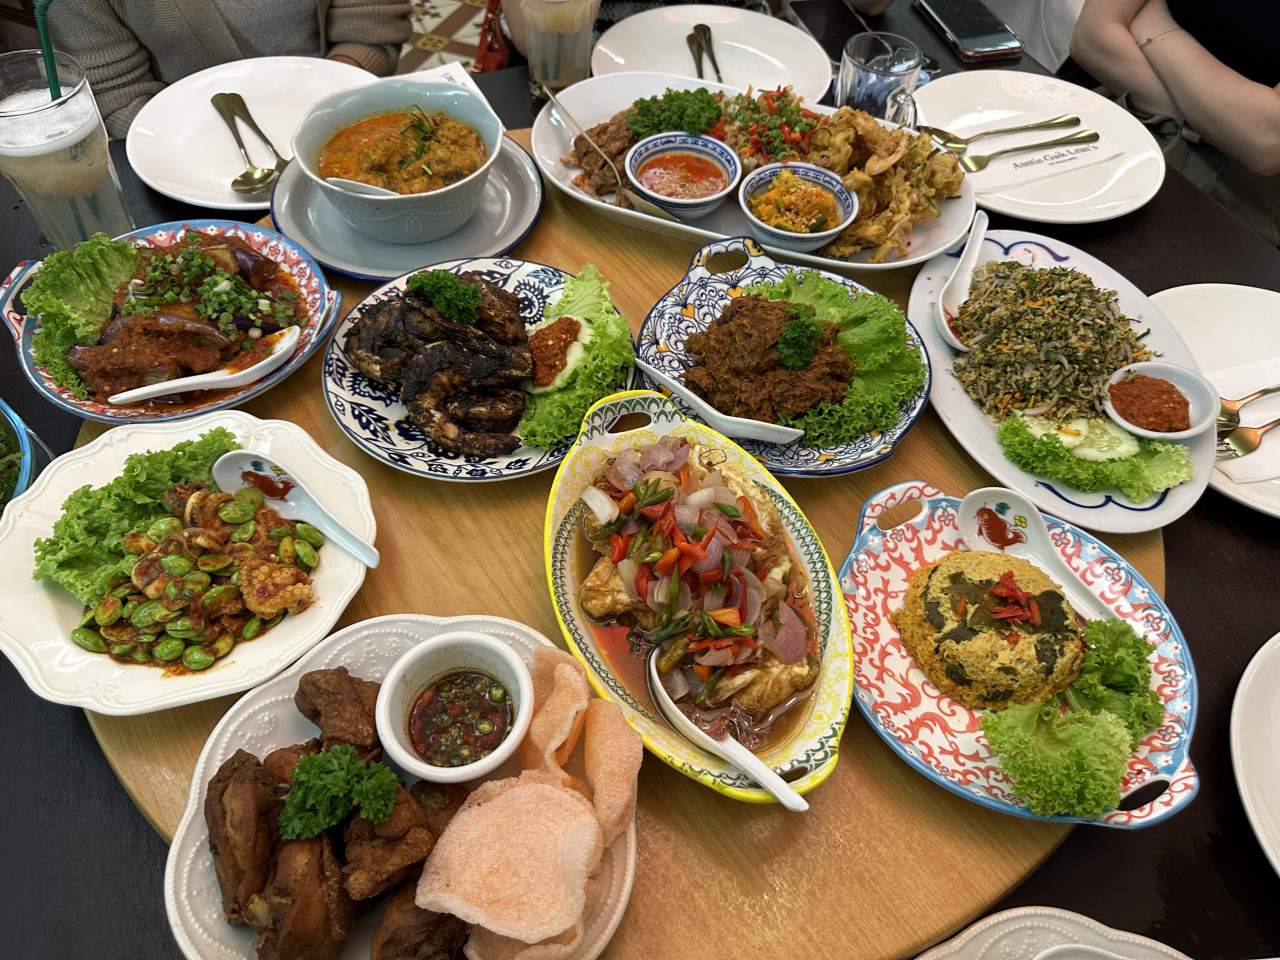 Almost the full spread at the restaurant, there were simply too many dishes to fit on the lazy susan. Among the dishes shown are Authentic Nyonya Curry Kapitan Chicken, Nyonya Inchi Kabin, Nyonya Beef Rendang, Otak Otak, Petai Octopus Sambal, Tamarind Prawns, and Nasi Ulam. – Haikal Fernandez pic